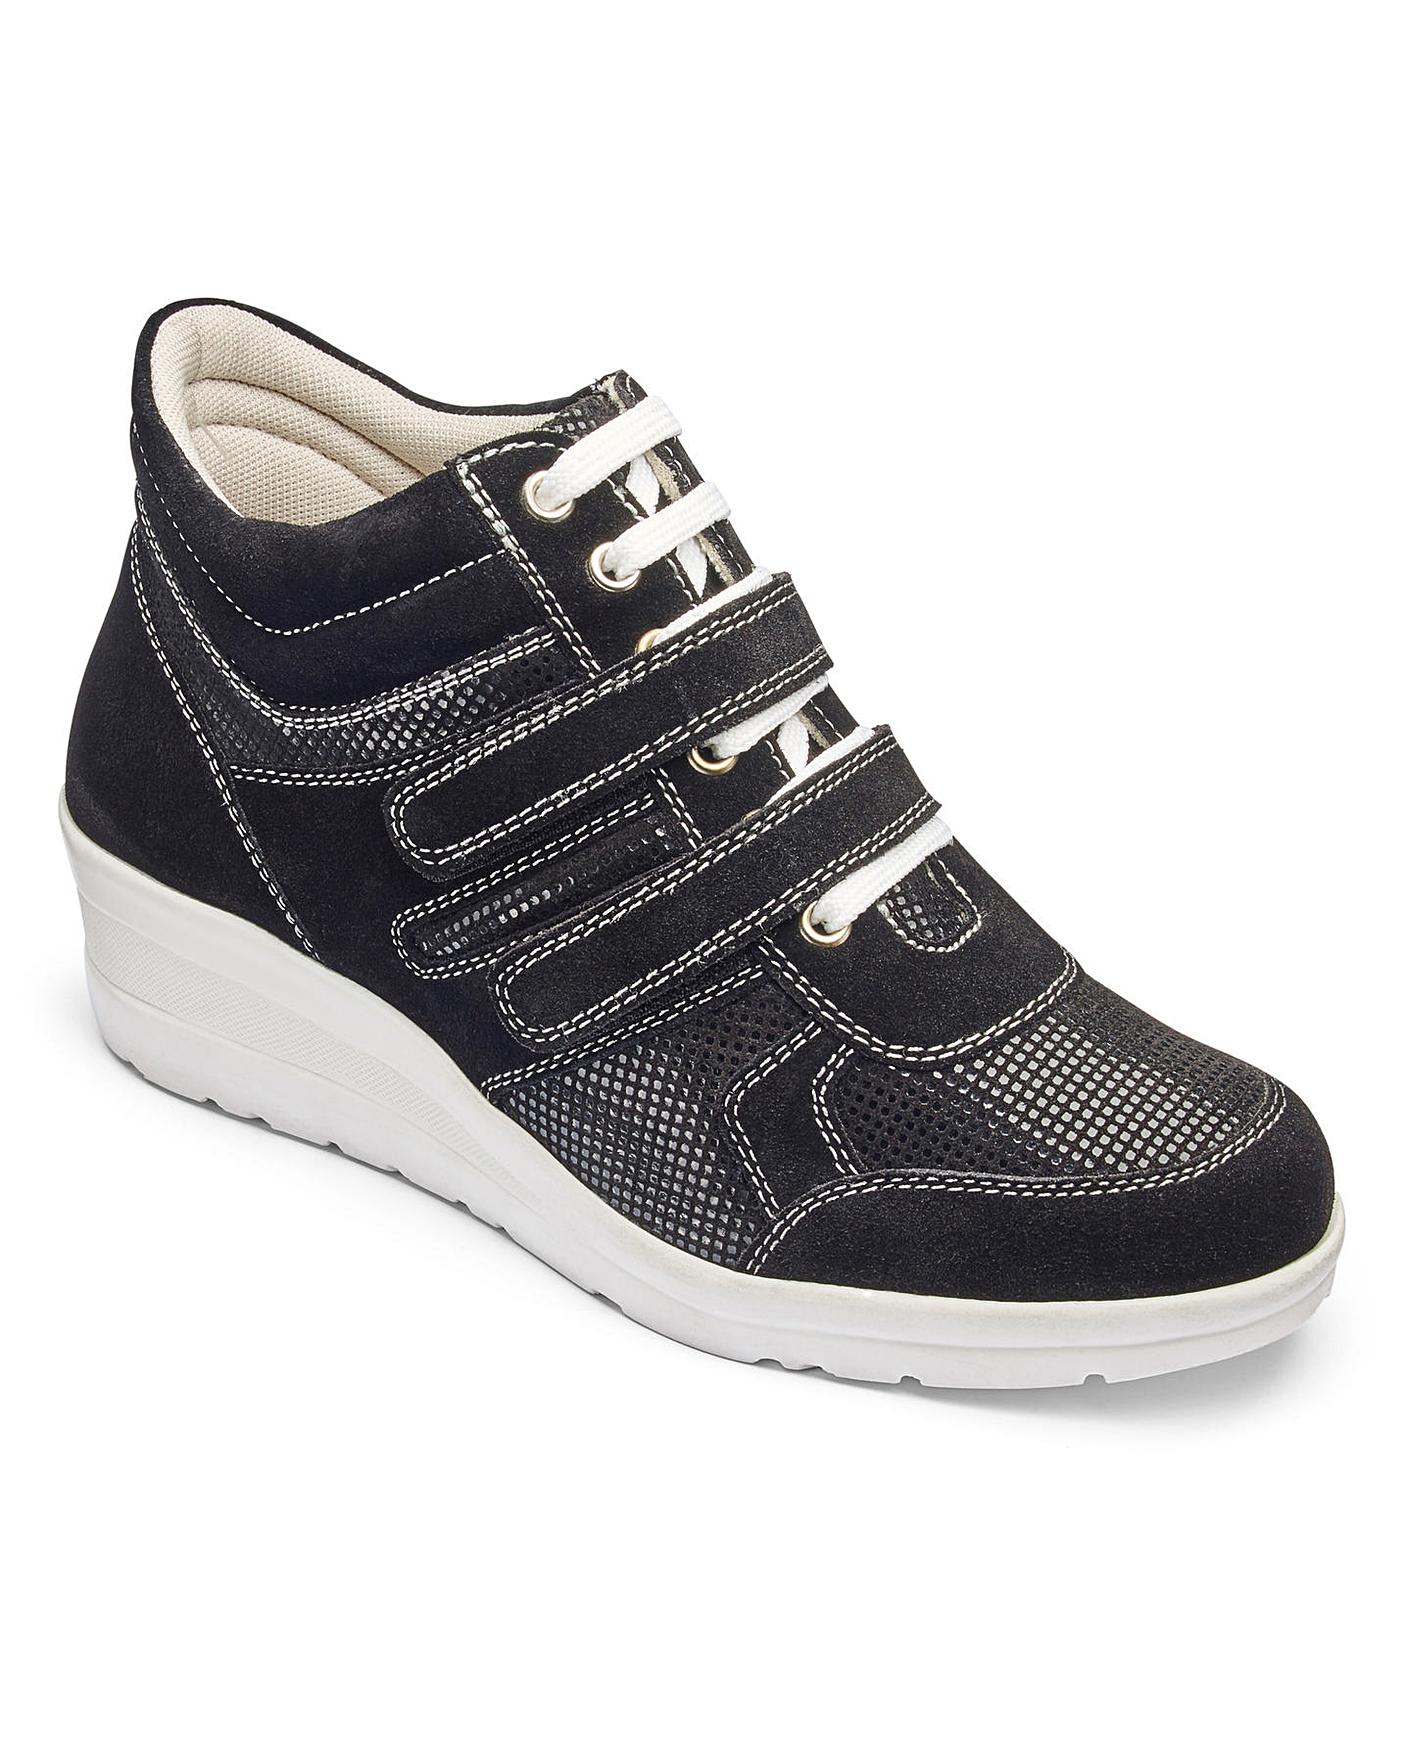 jd williams wedge trainers